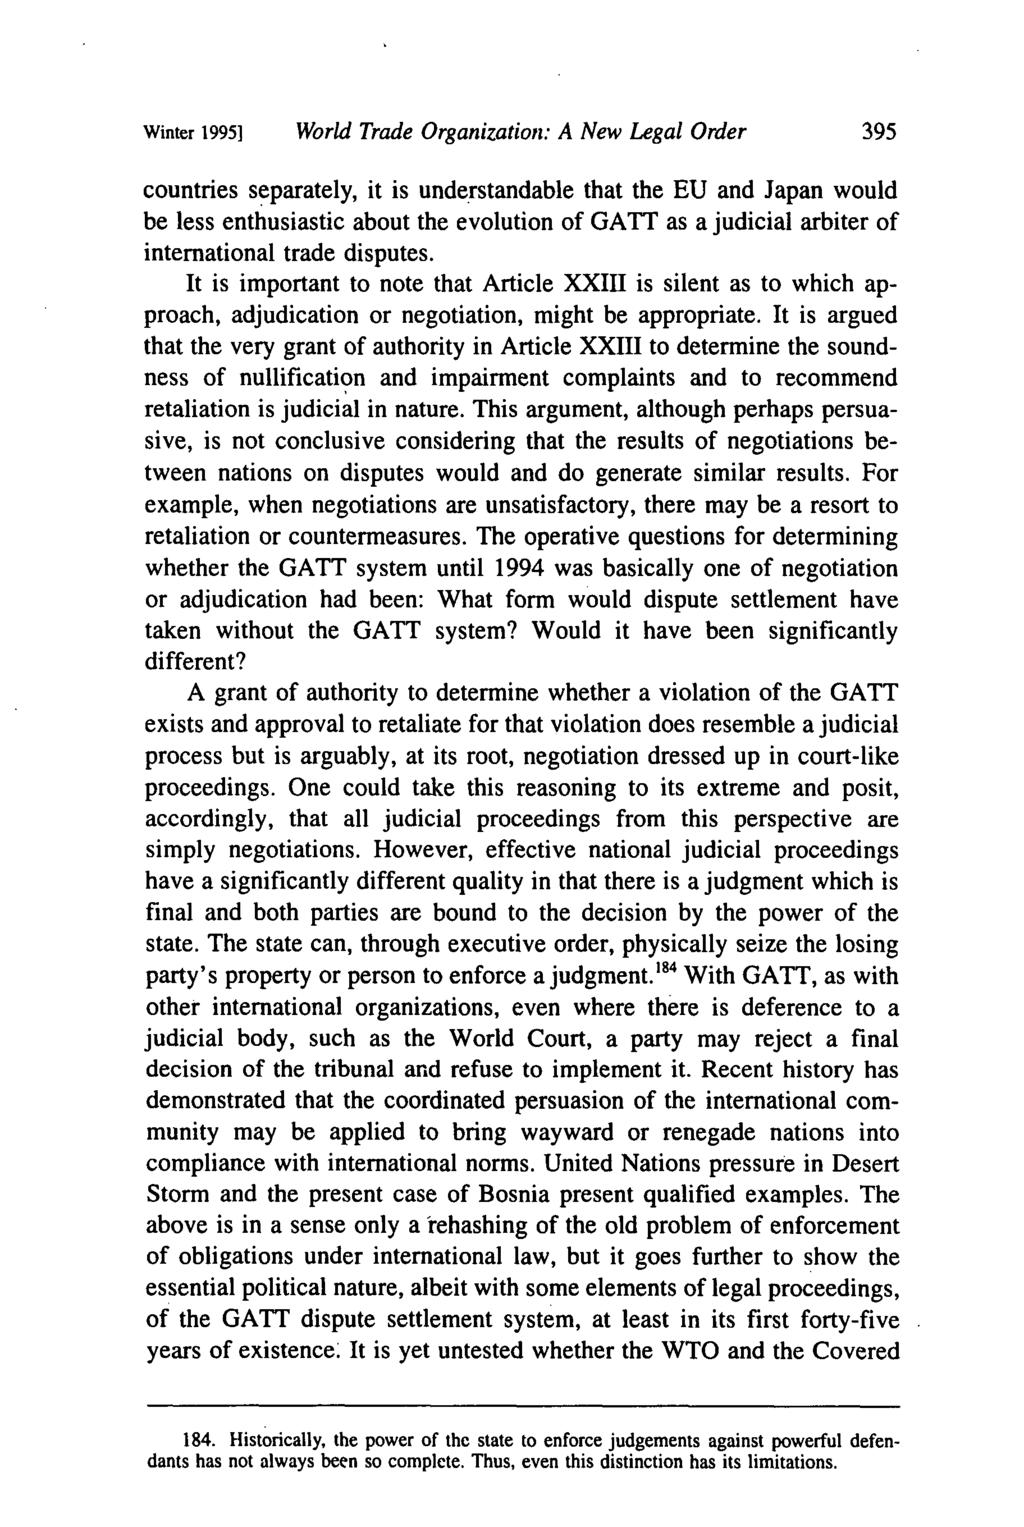 Winter 1995] World Trade Organization: A New Legal Order countries separately, it is understandable that the EU and Japan would be less enthusiastic about the evolution of GATT as a judicial arbiter